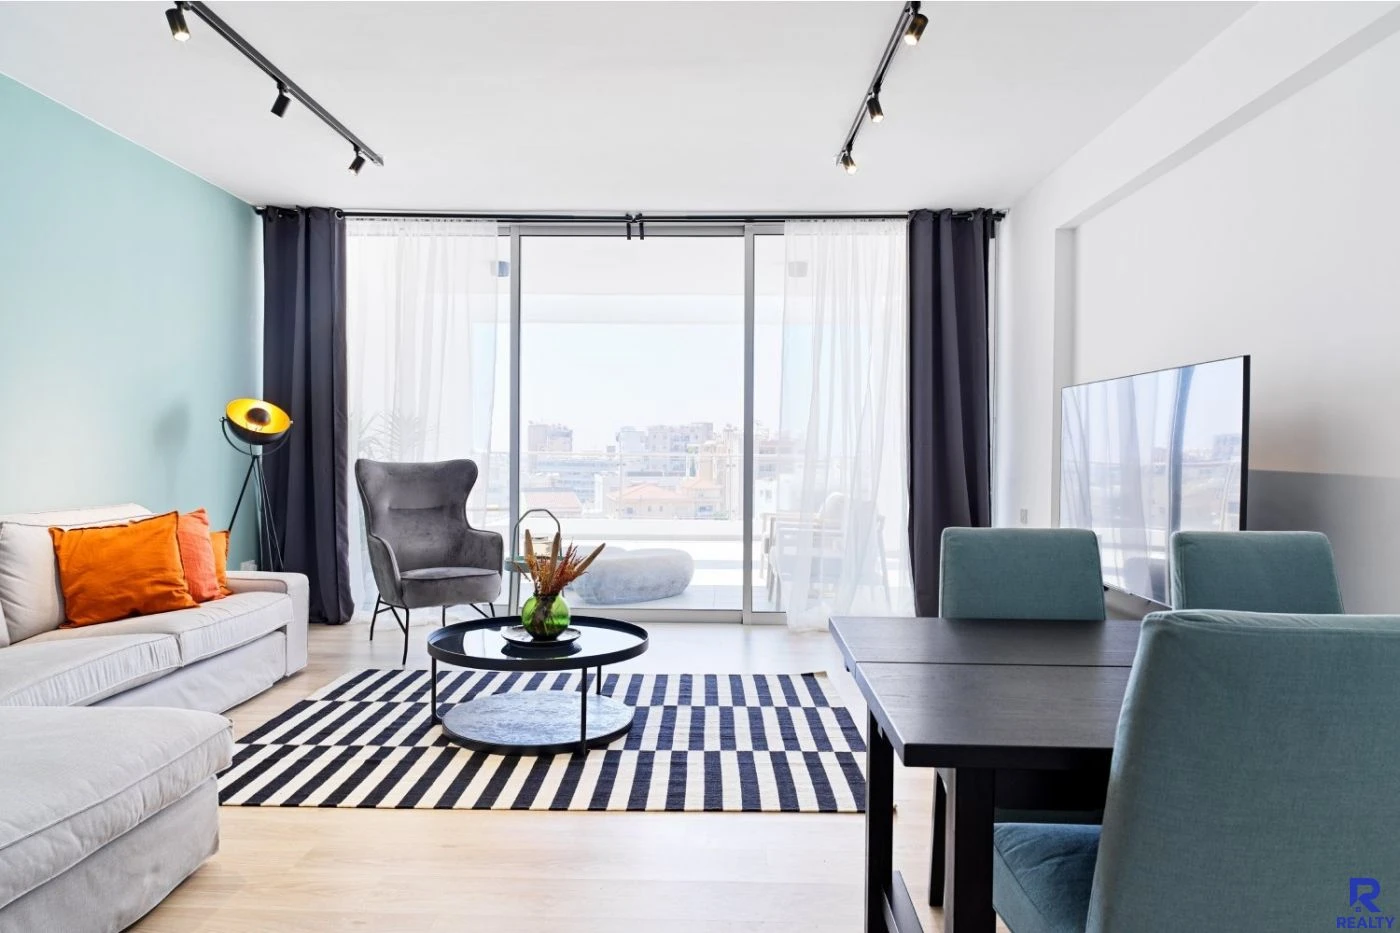 2-bedroom penthouse to rent, image 1